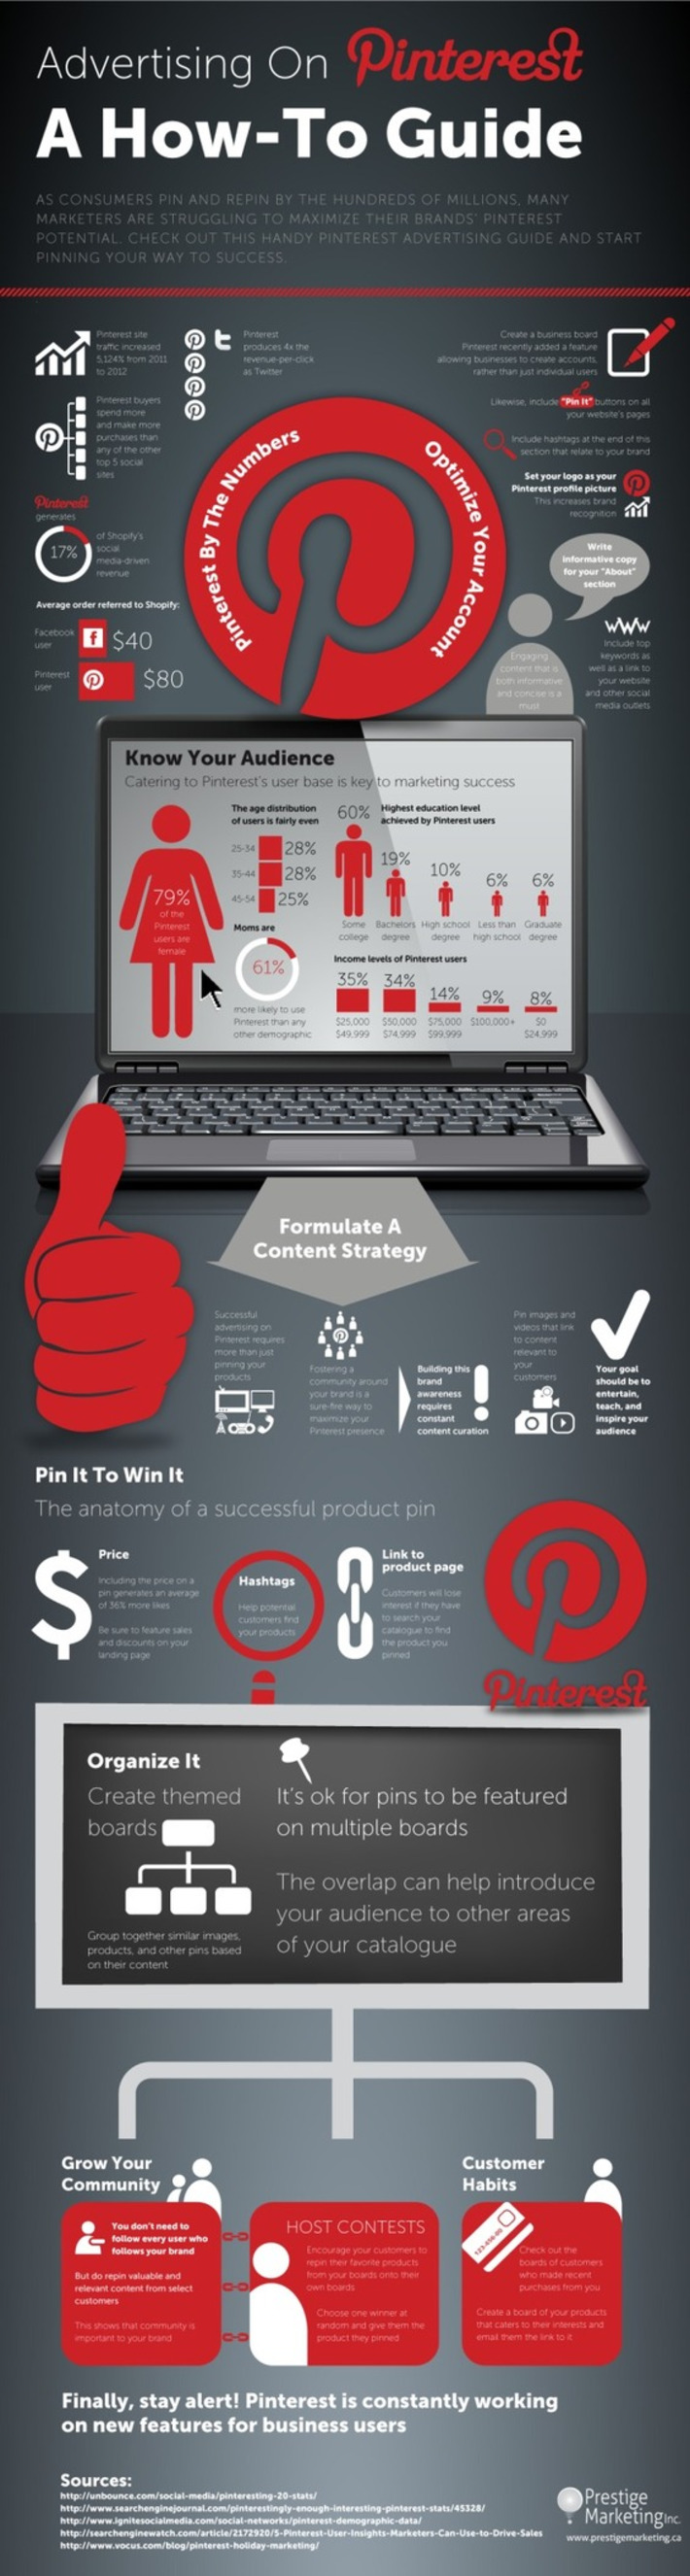 Infographic: Pinterest requires constant content curation | A Marketing Mix | Scoop.it